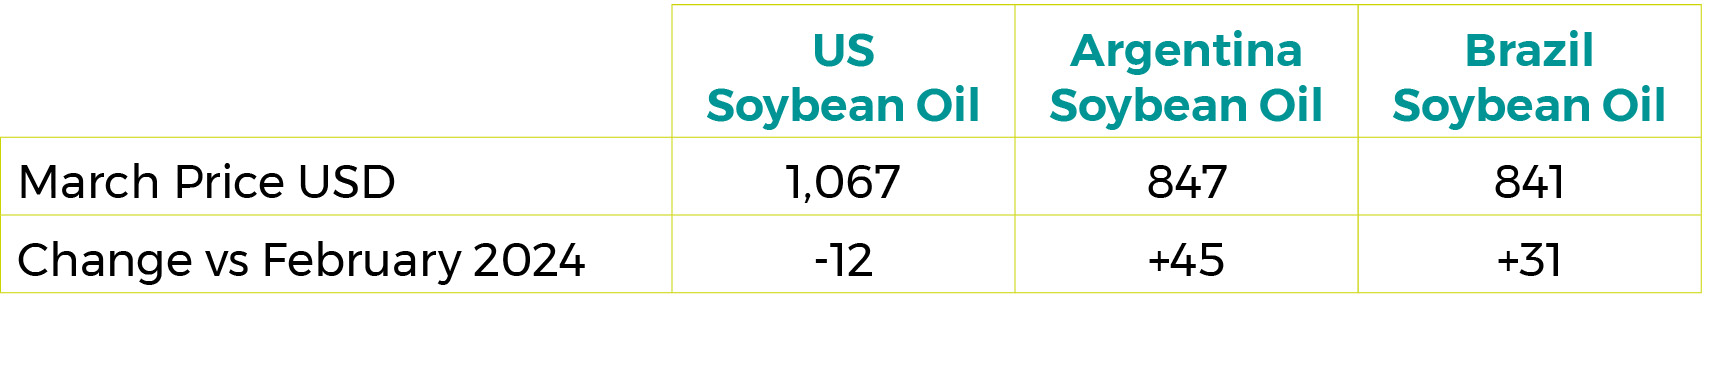 March 2024 Soybean Oil Export Prices $/tonne